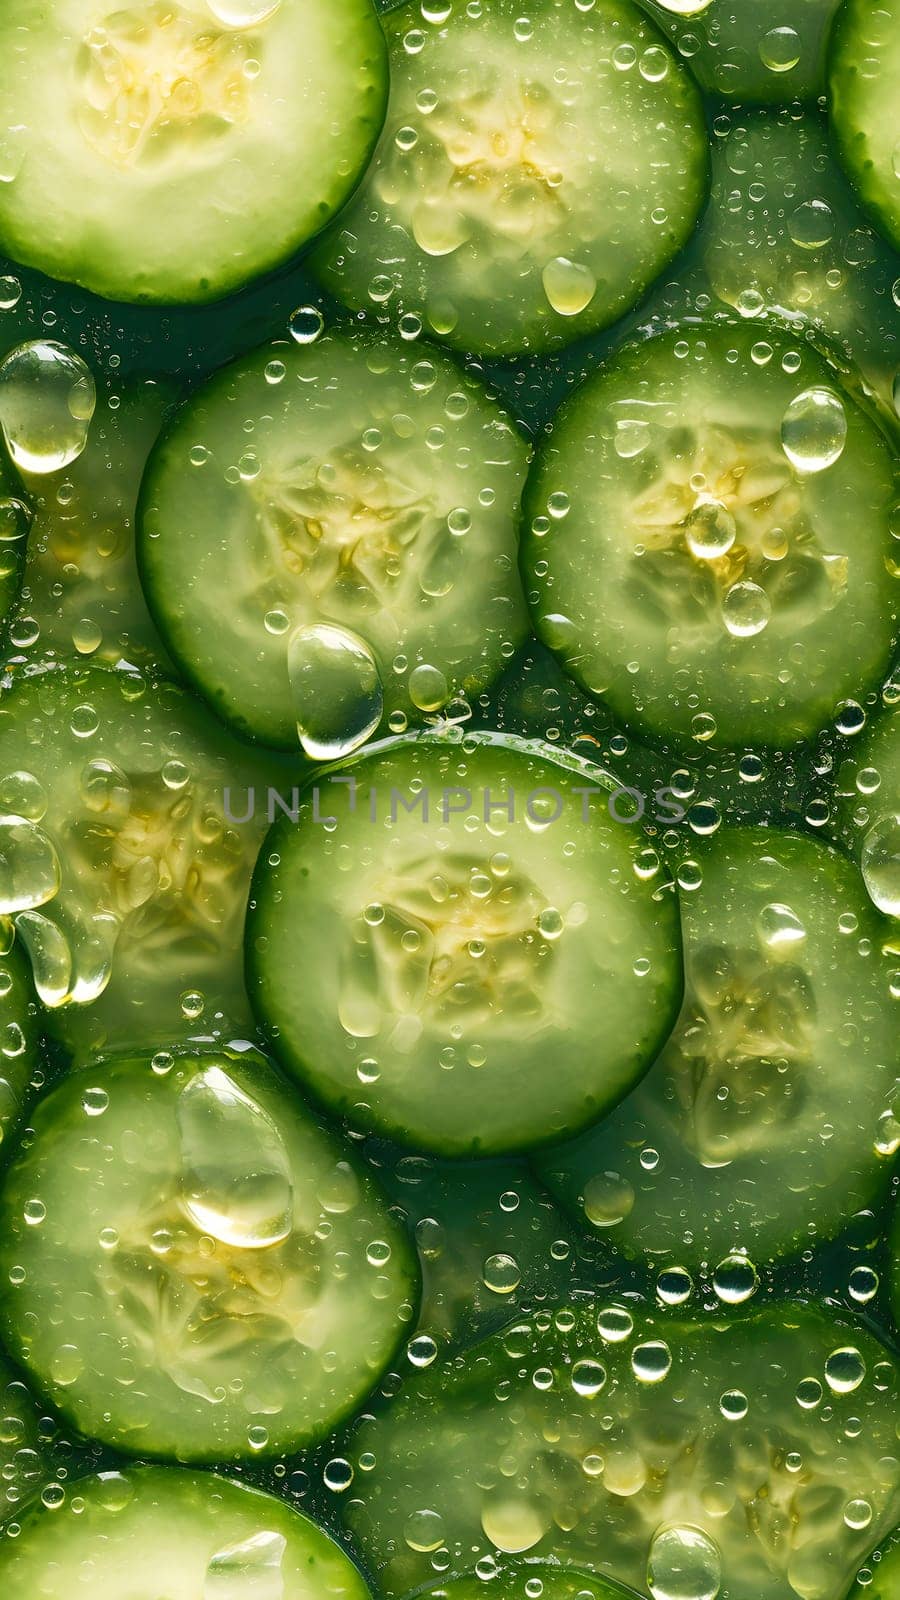 seamless background and texture of sliced cucumbers with drops of water. Neural network generated in May 2023. Not based on any actual person, scene or pattern.